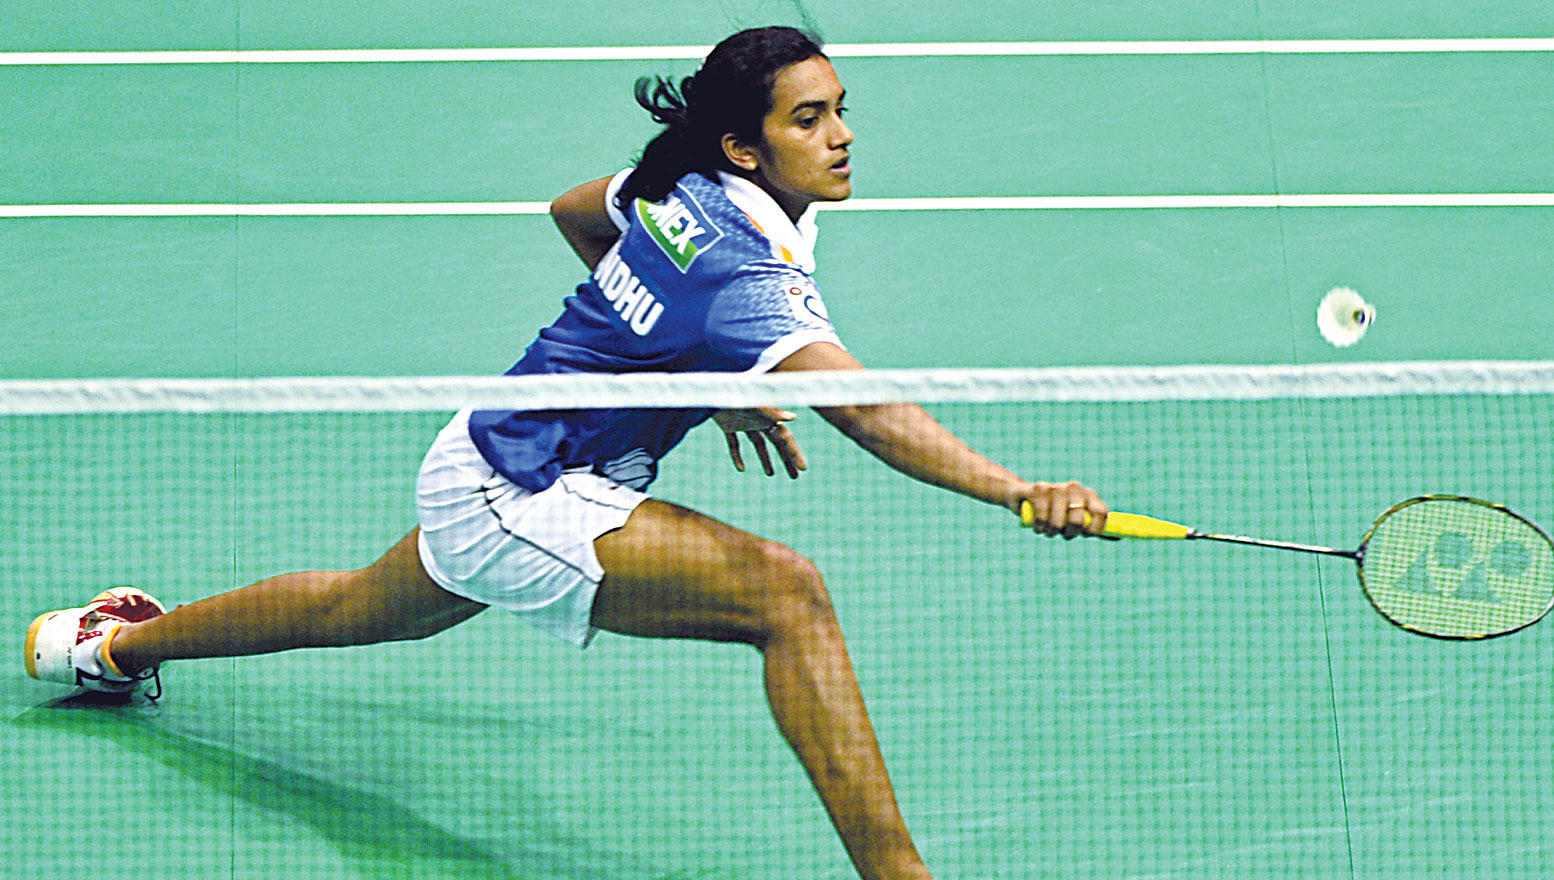 PV Sindhu ensured India will collect at least one more medal at the Rio Games.